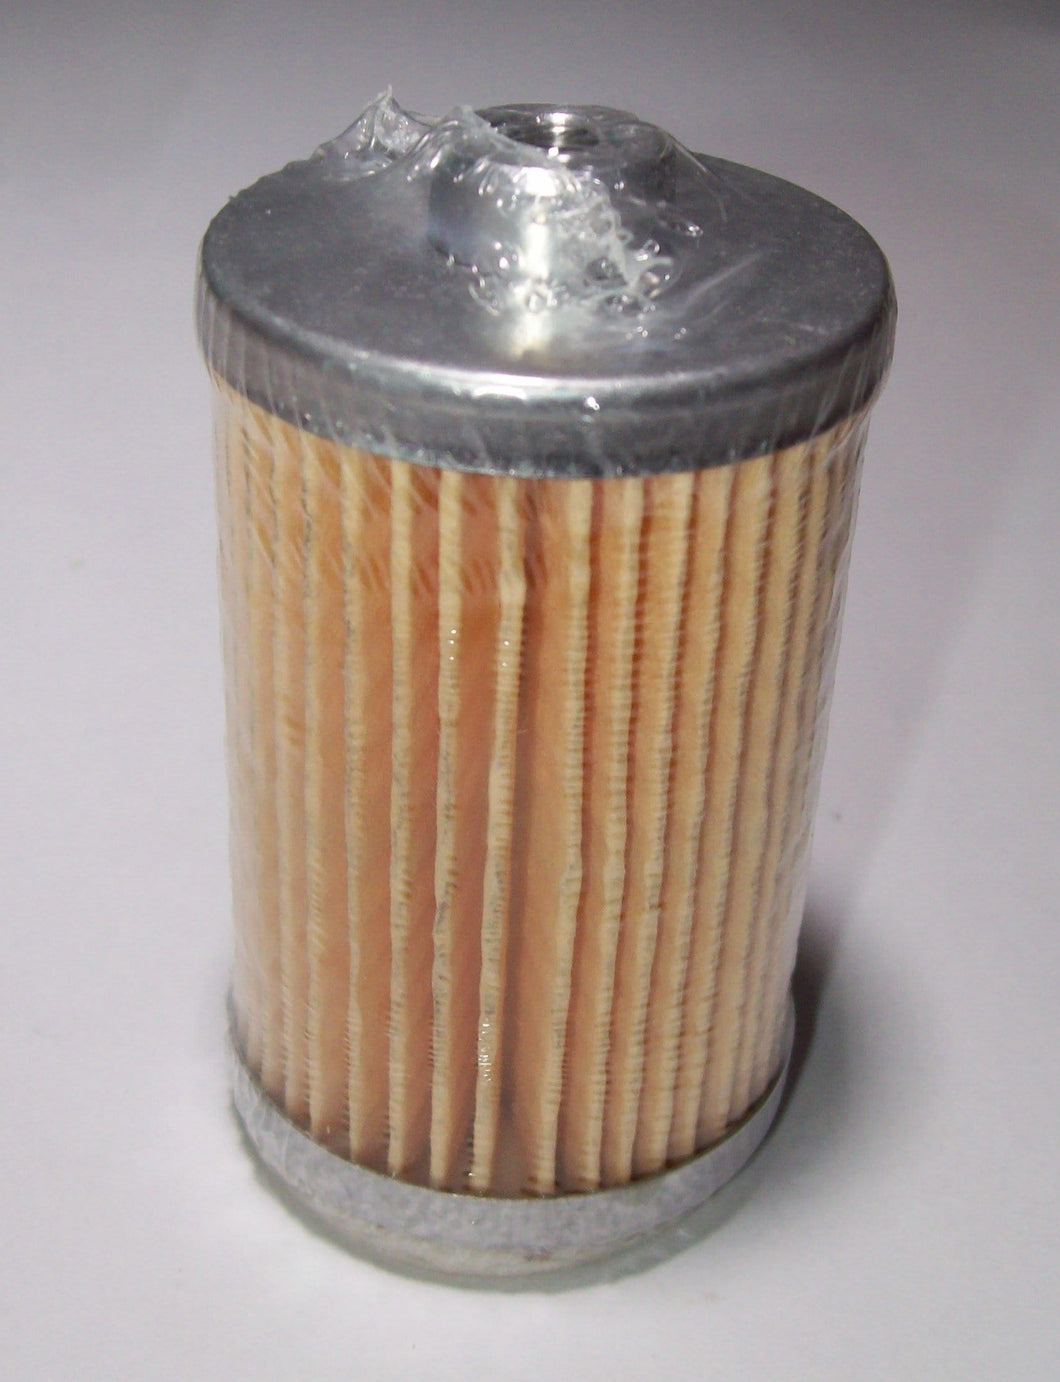 Air Filter (Suction side) replaces Rietschle 317900